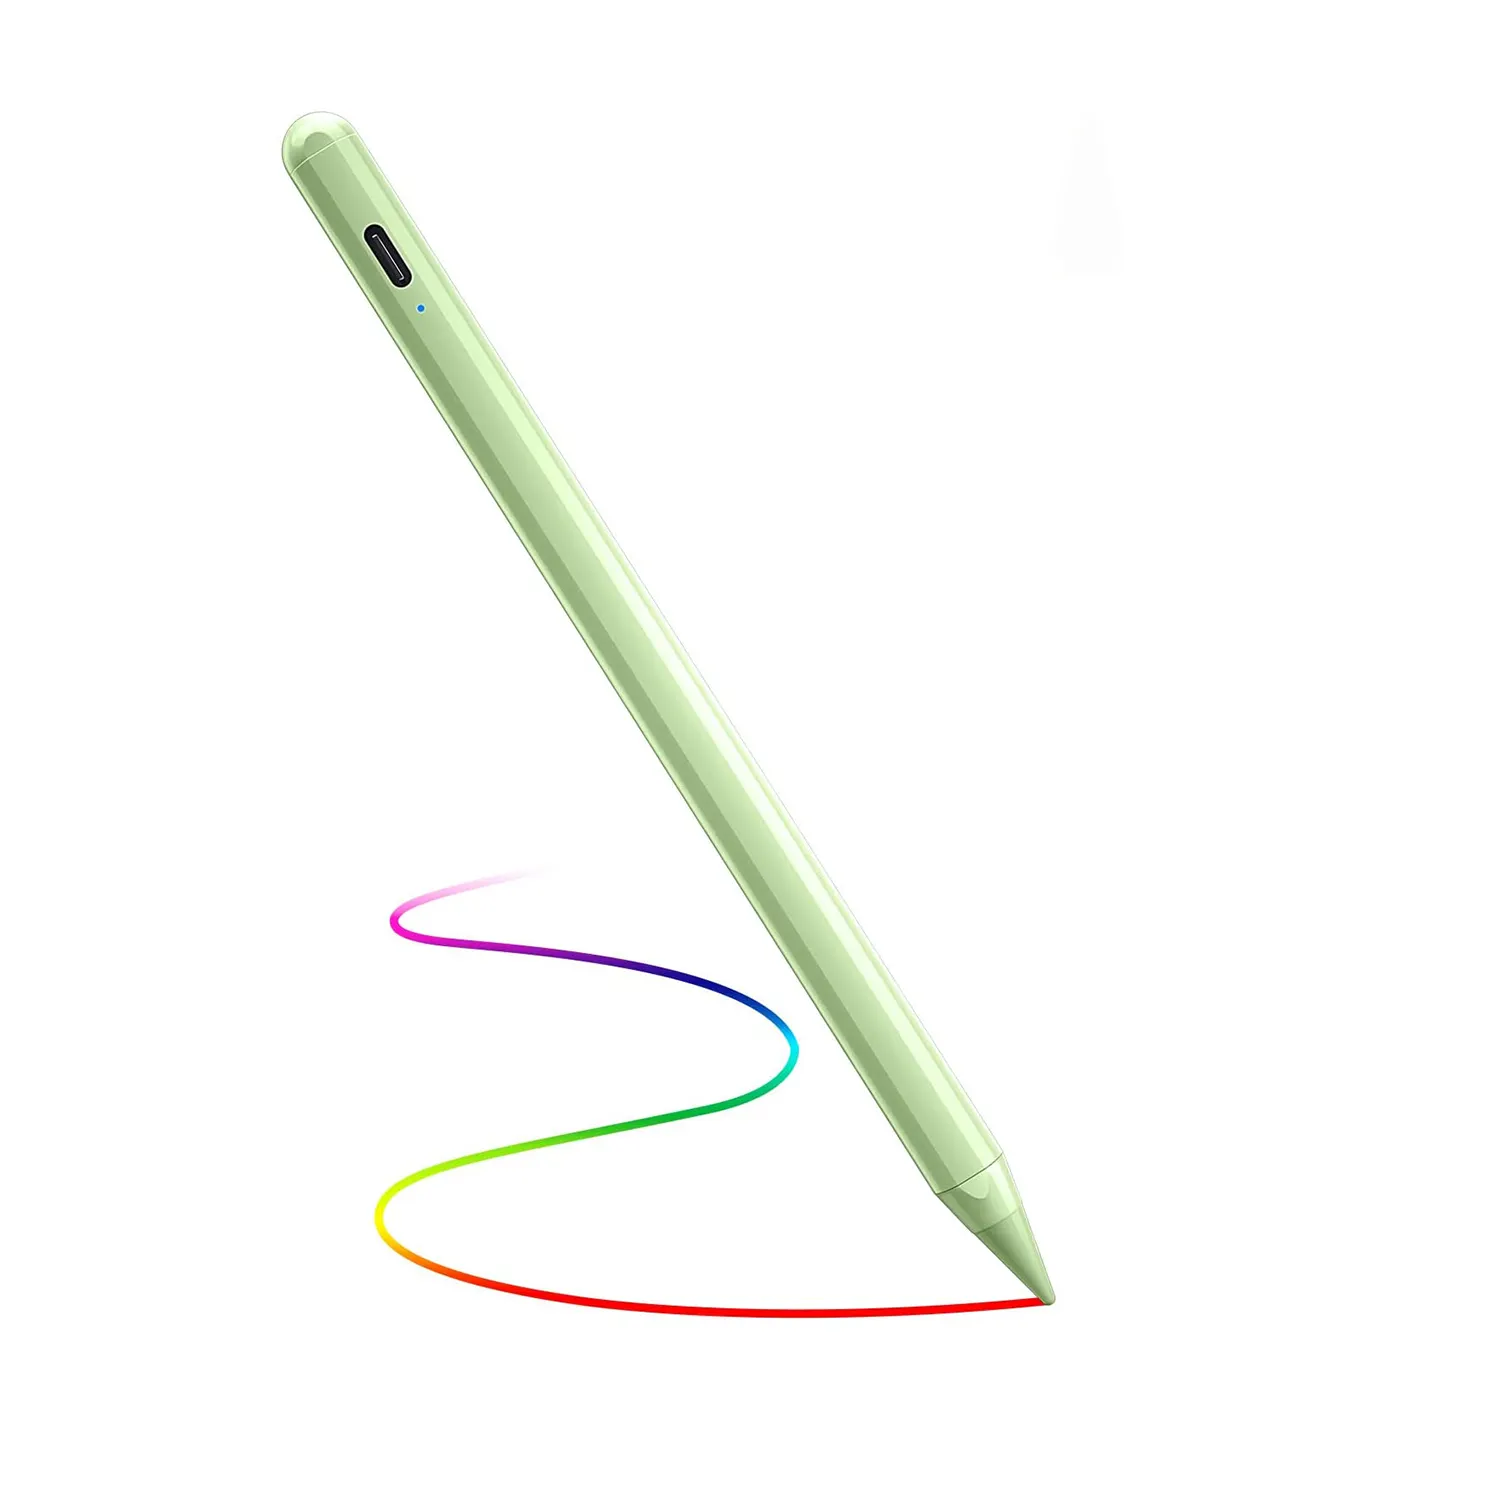 Bestbuy New Product Stylus Pencil Pro Green Magnetic Touch Tablet Drawing Pen for iPad